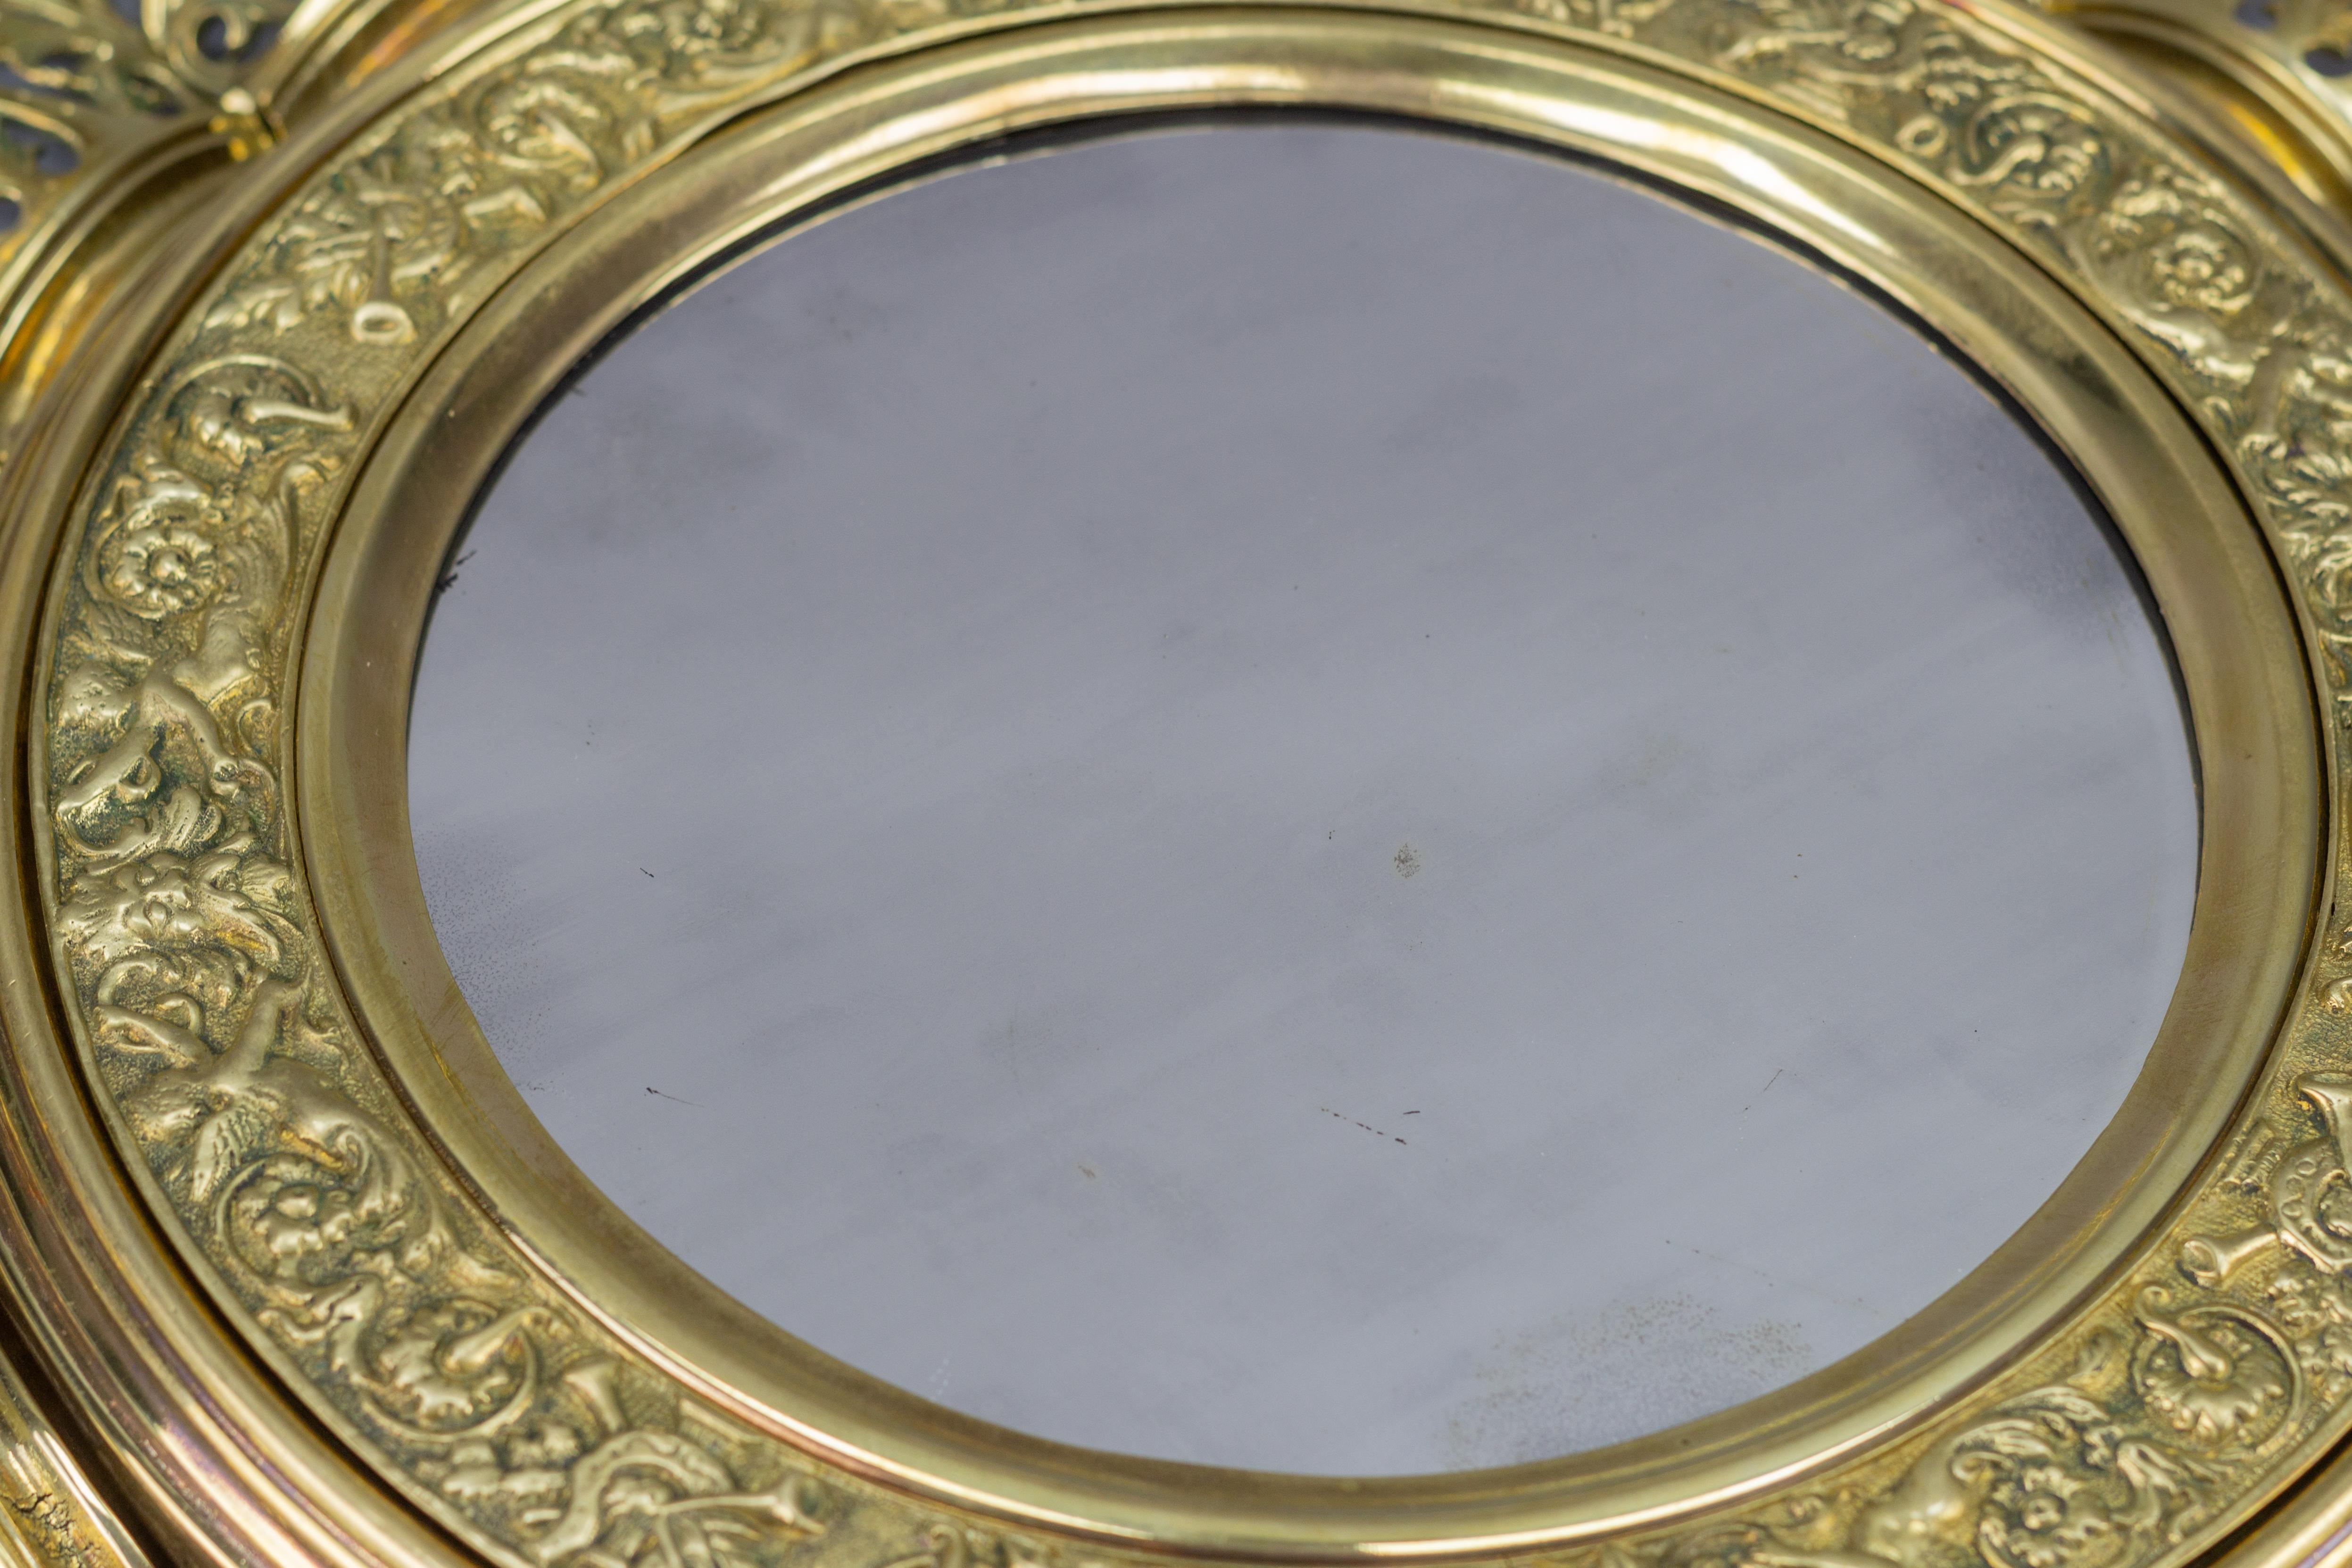 Antique Circular Bronze and Brass Mirror in Sunburst Shape, Early 20th Century For Sale 6